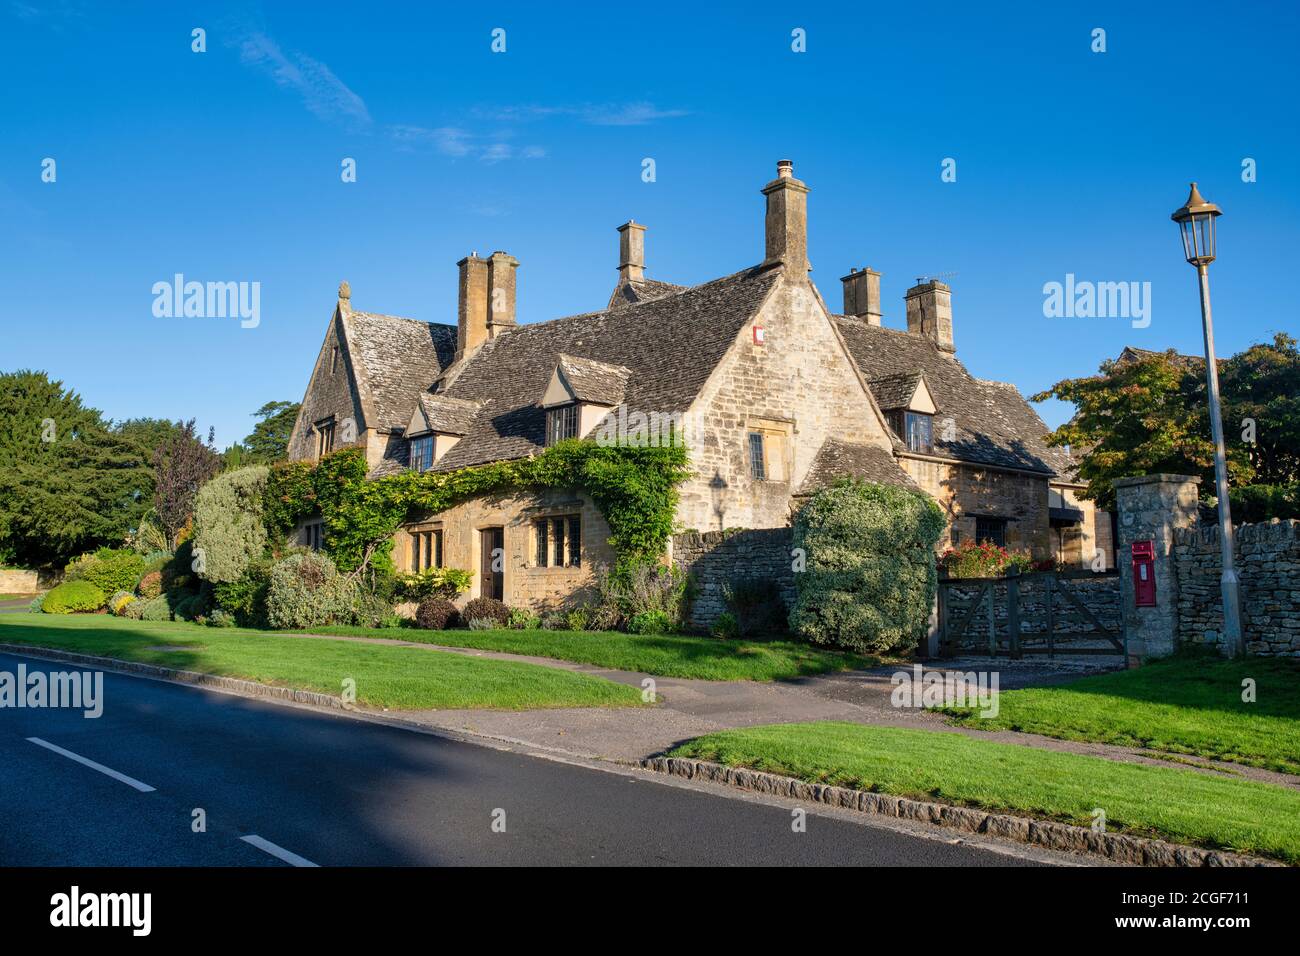 Cotswold Stone House in Chipping Campden in september. Chipping Campden, Cotswolds, Gloucestershire, England Stock Photo